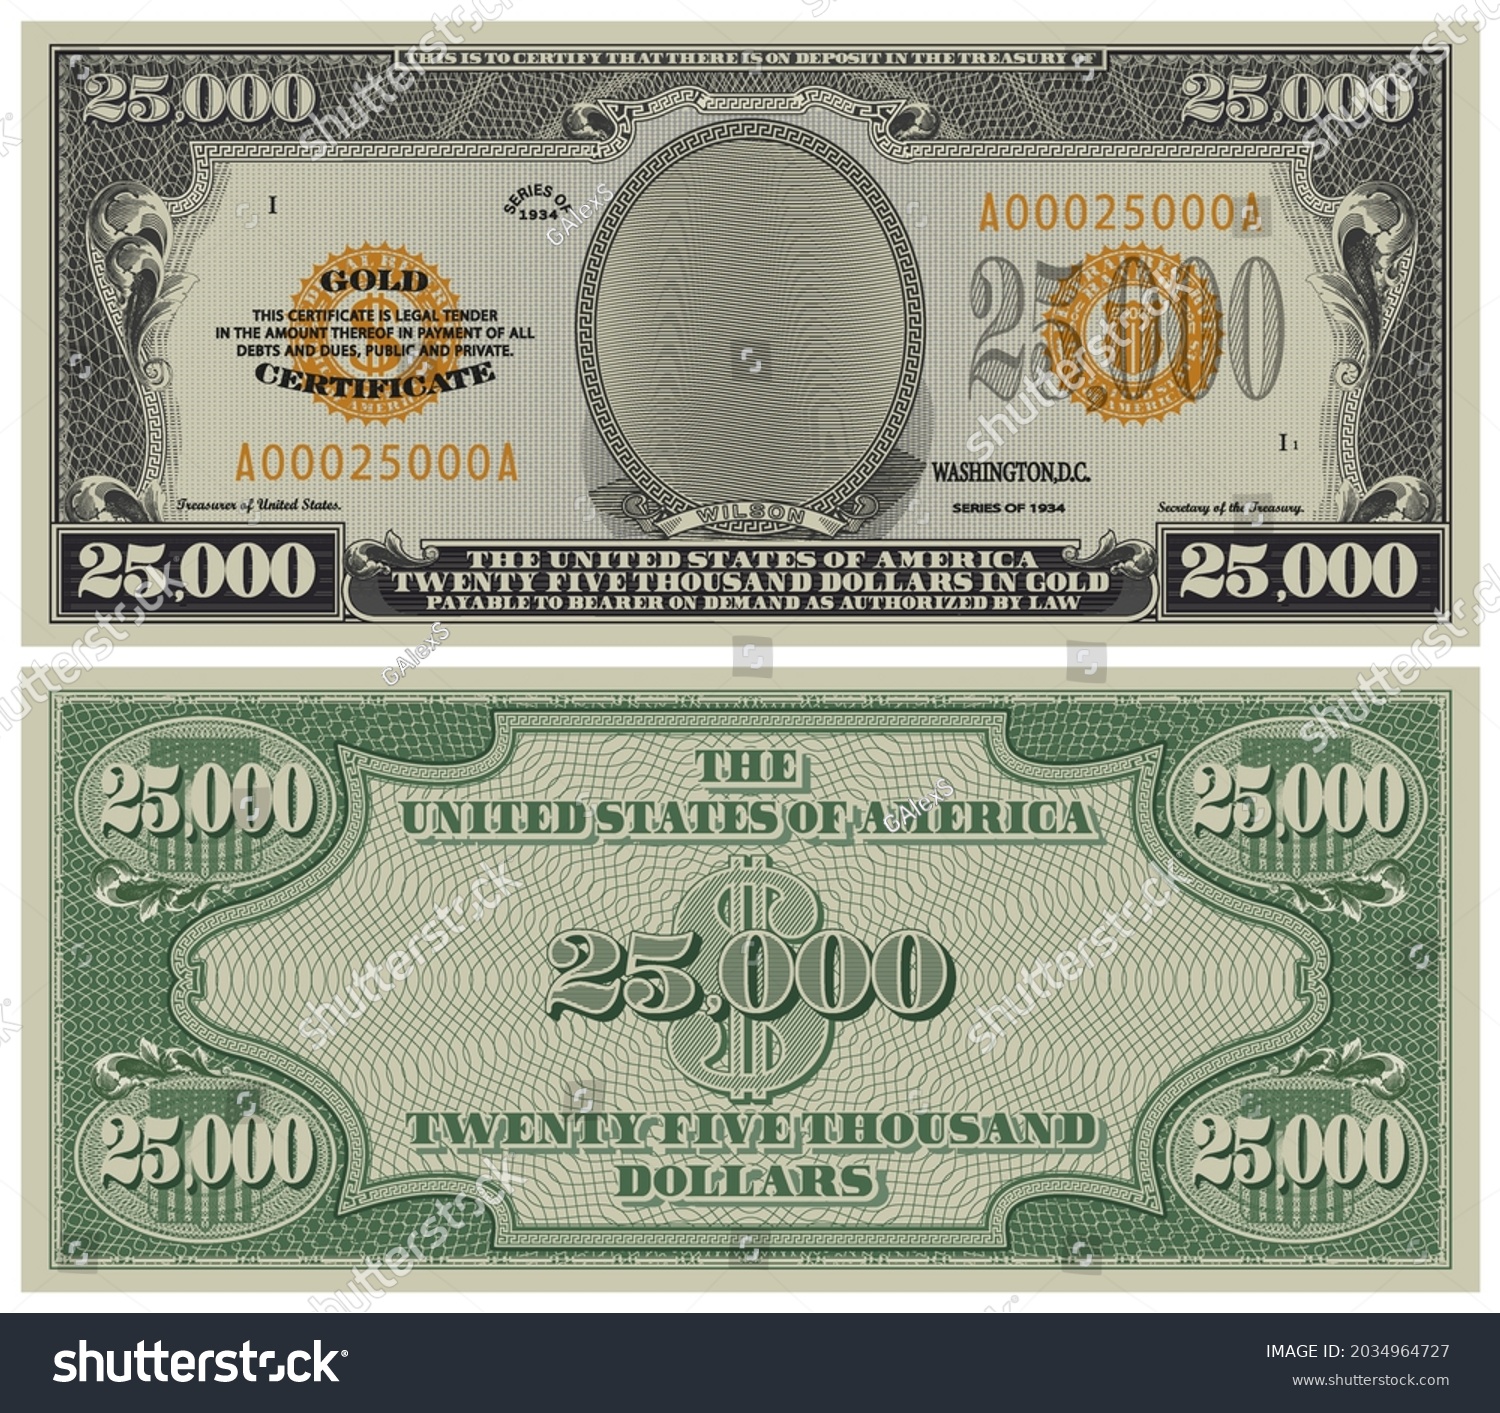 SVG of Fictional obverse and reverse of a gold certificate with a face value of 25,000 dollars. US paper money svg